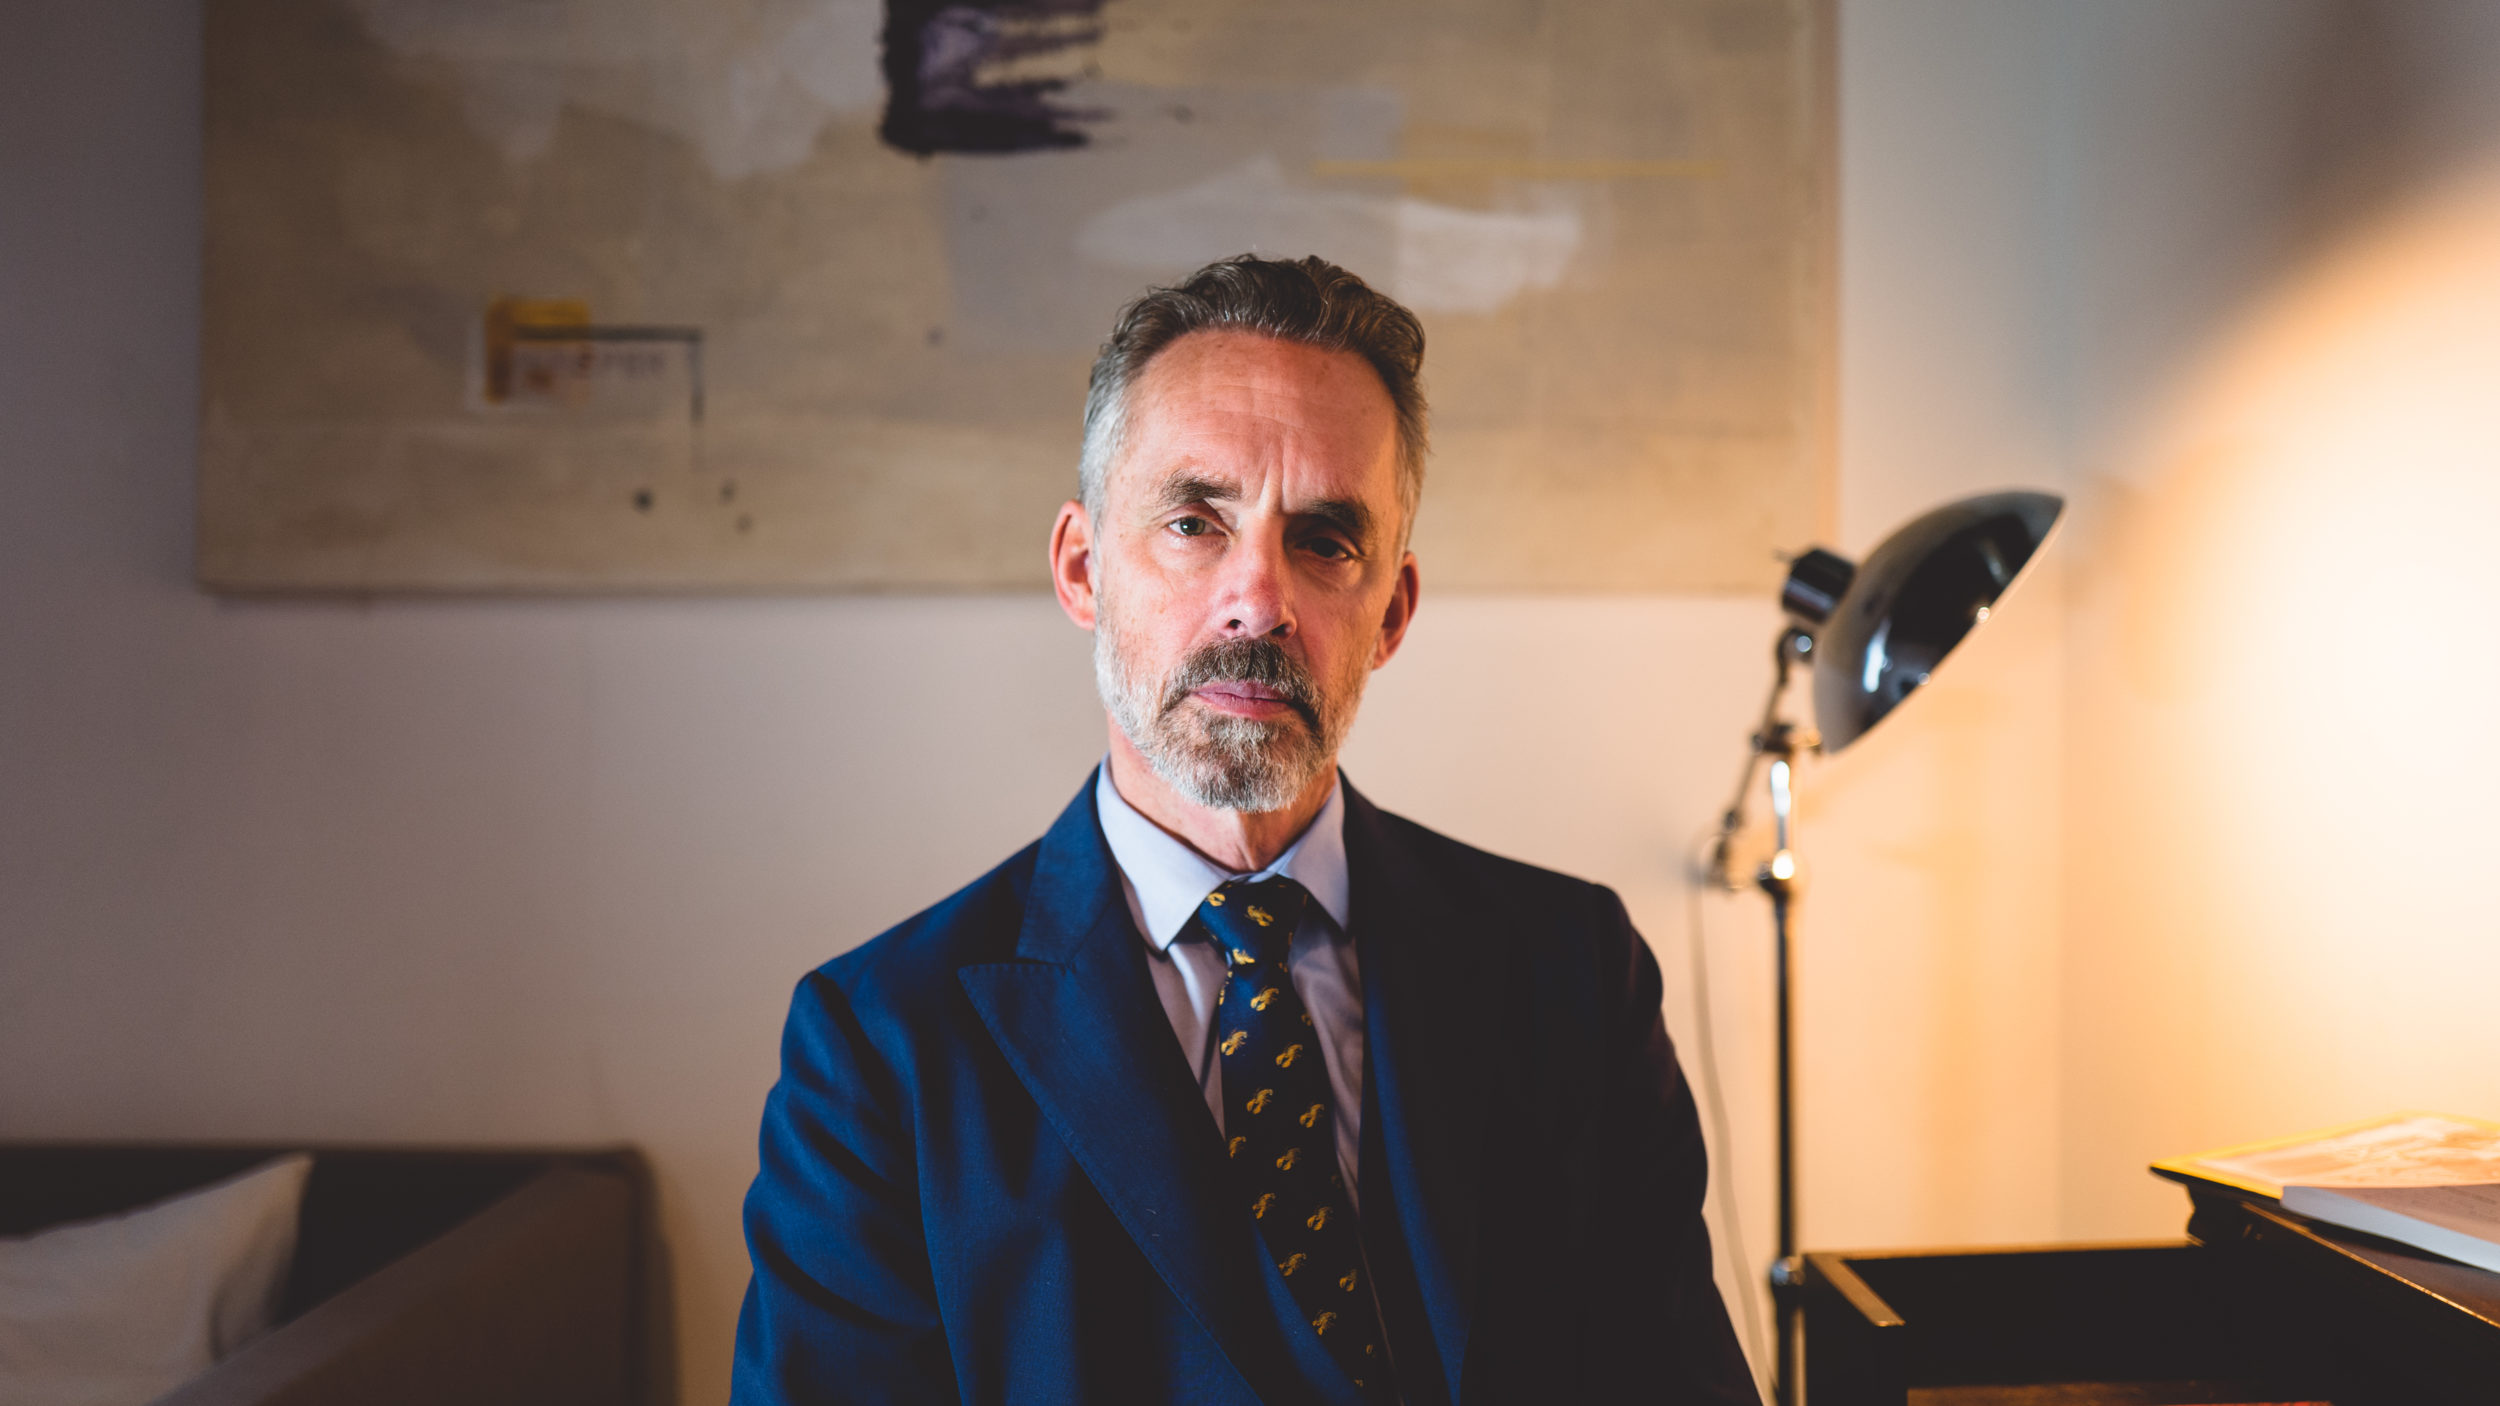 Jordan B. Peterson on How to Confidence, Cultivate Peace, the Psychology of MONEY (Part